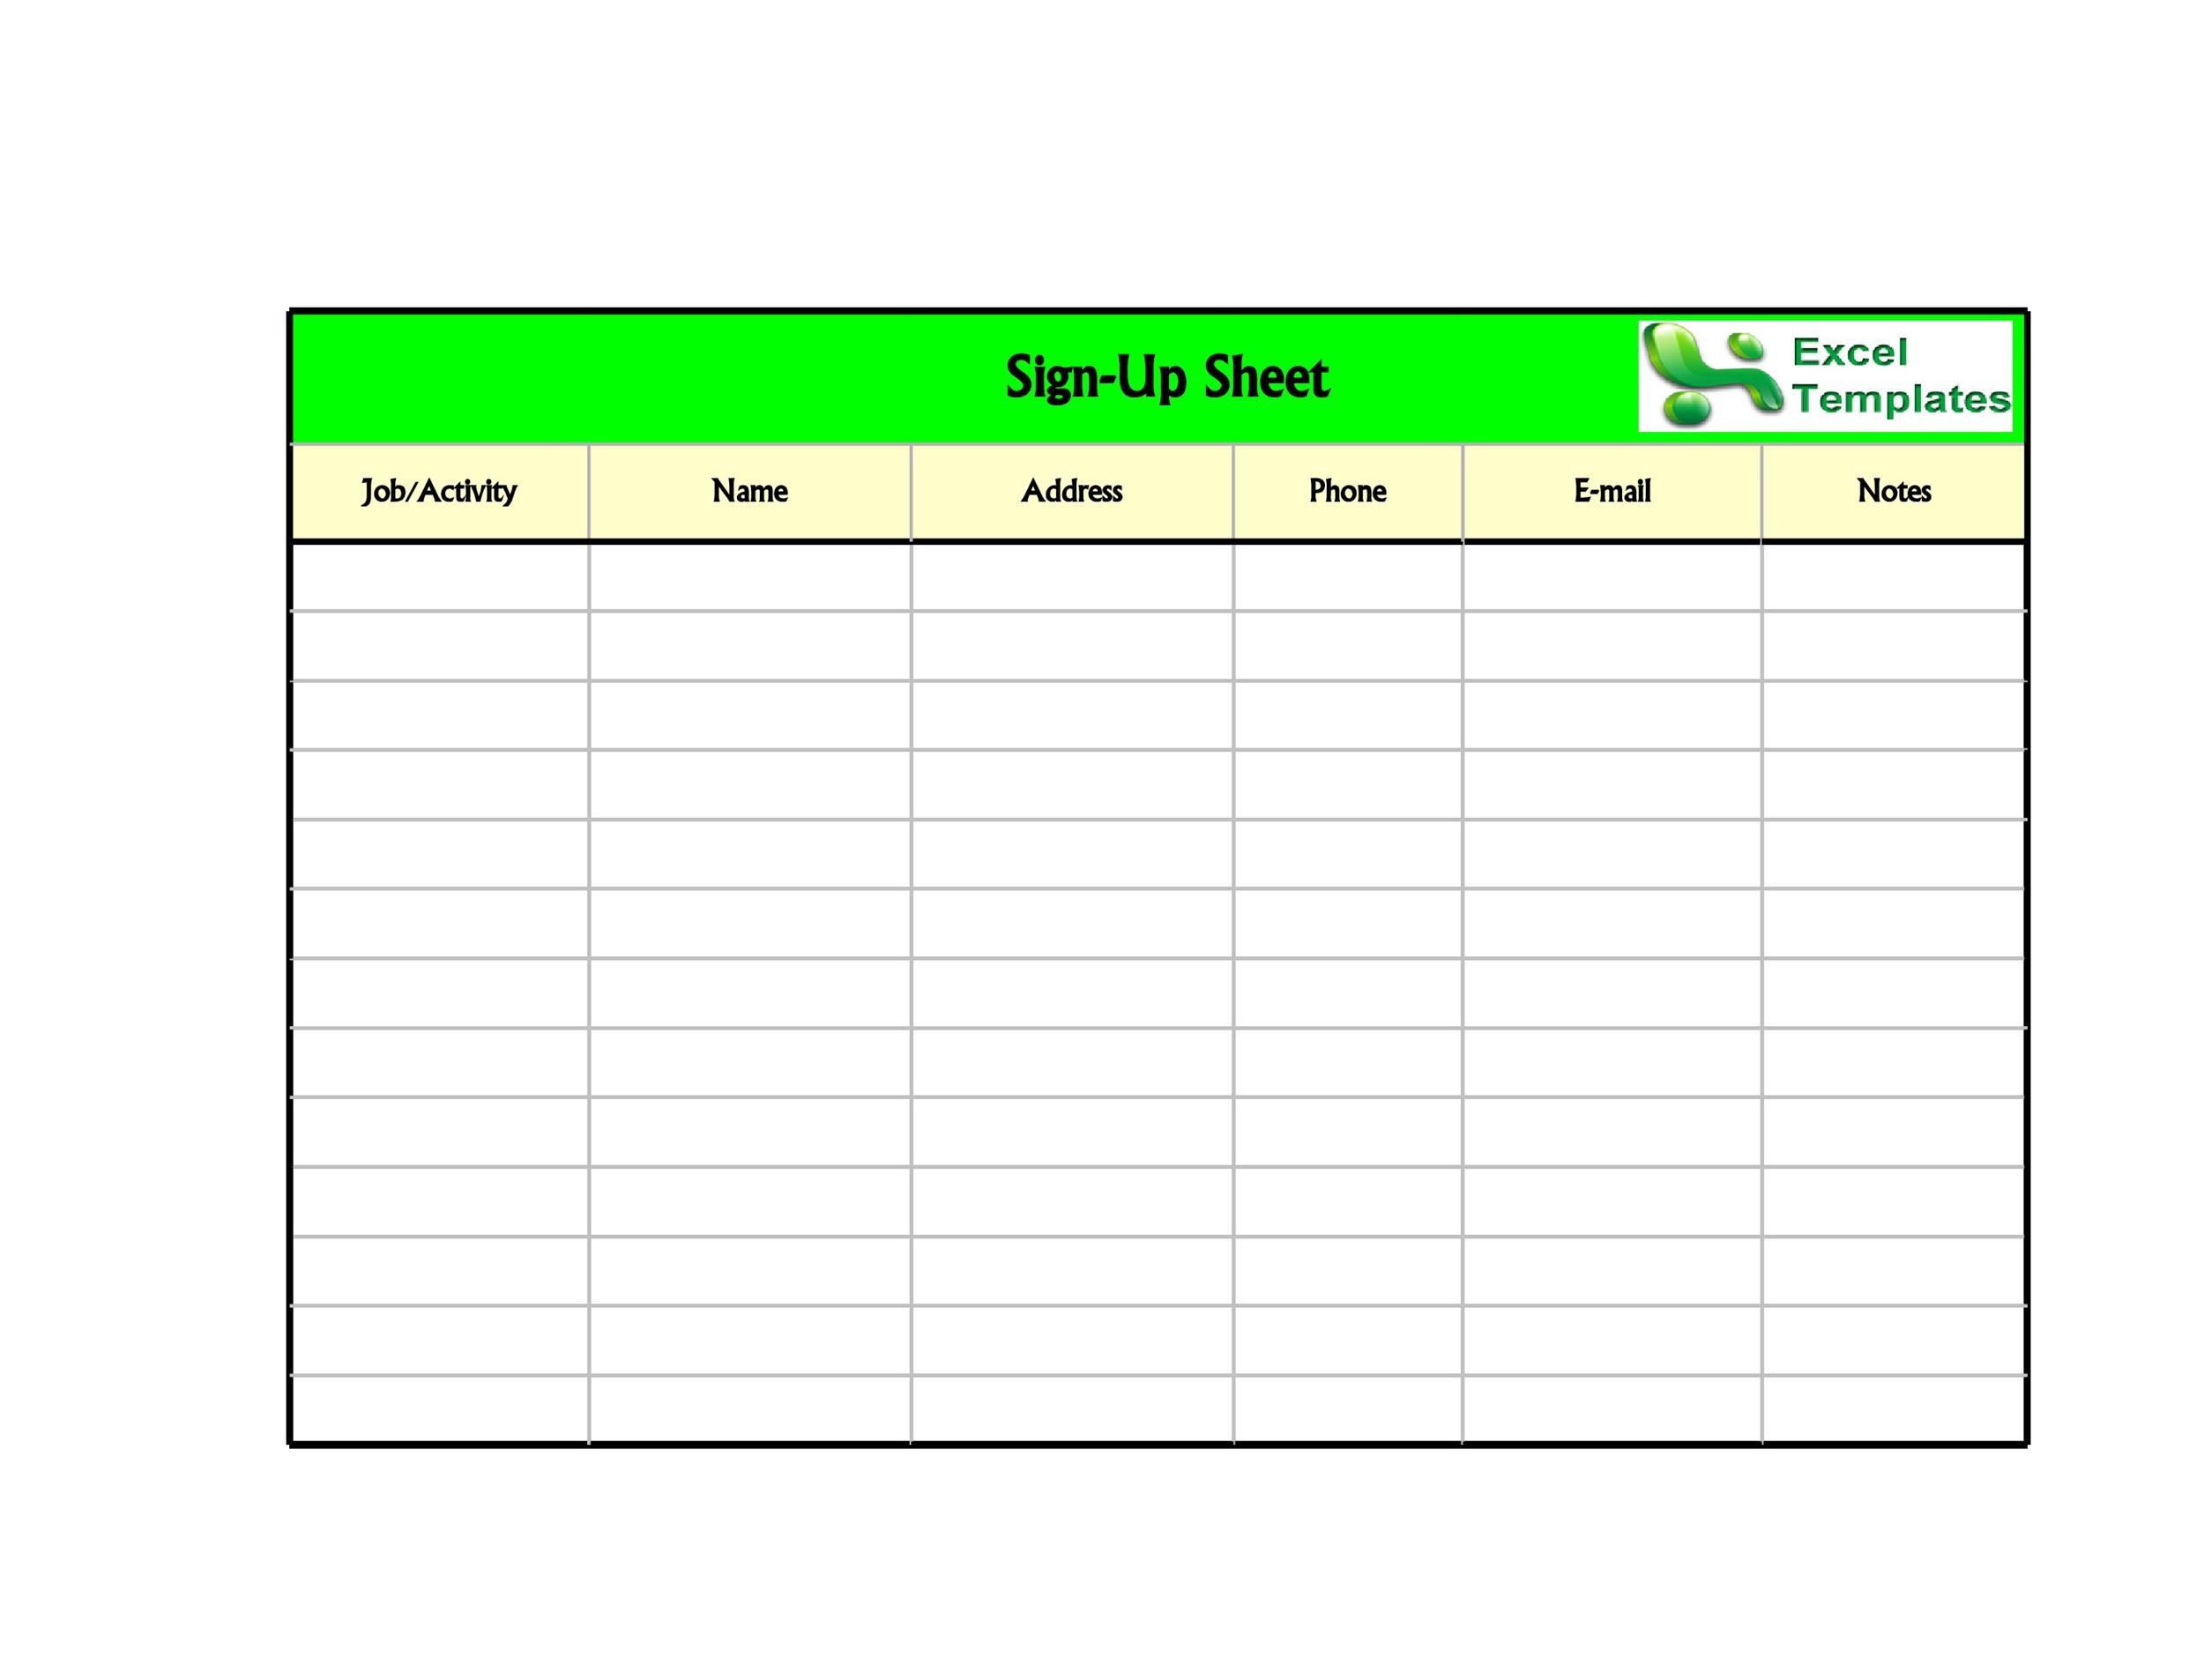 divine-free-sign-up-sheet-template-word-petty-cash-book-format-in-excel